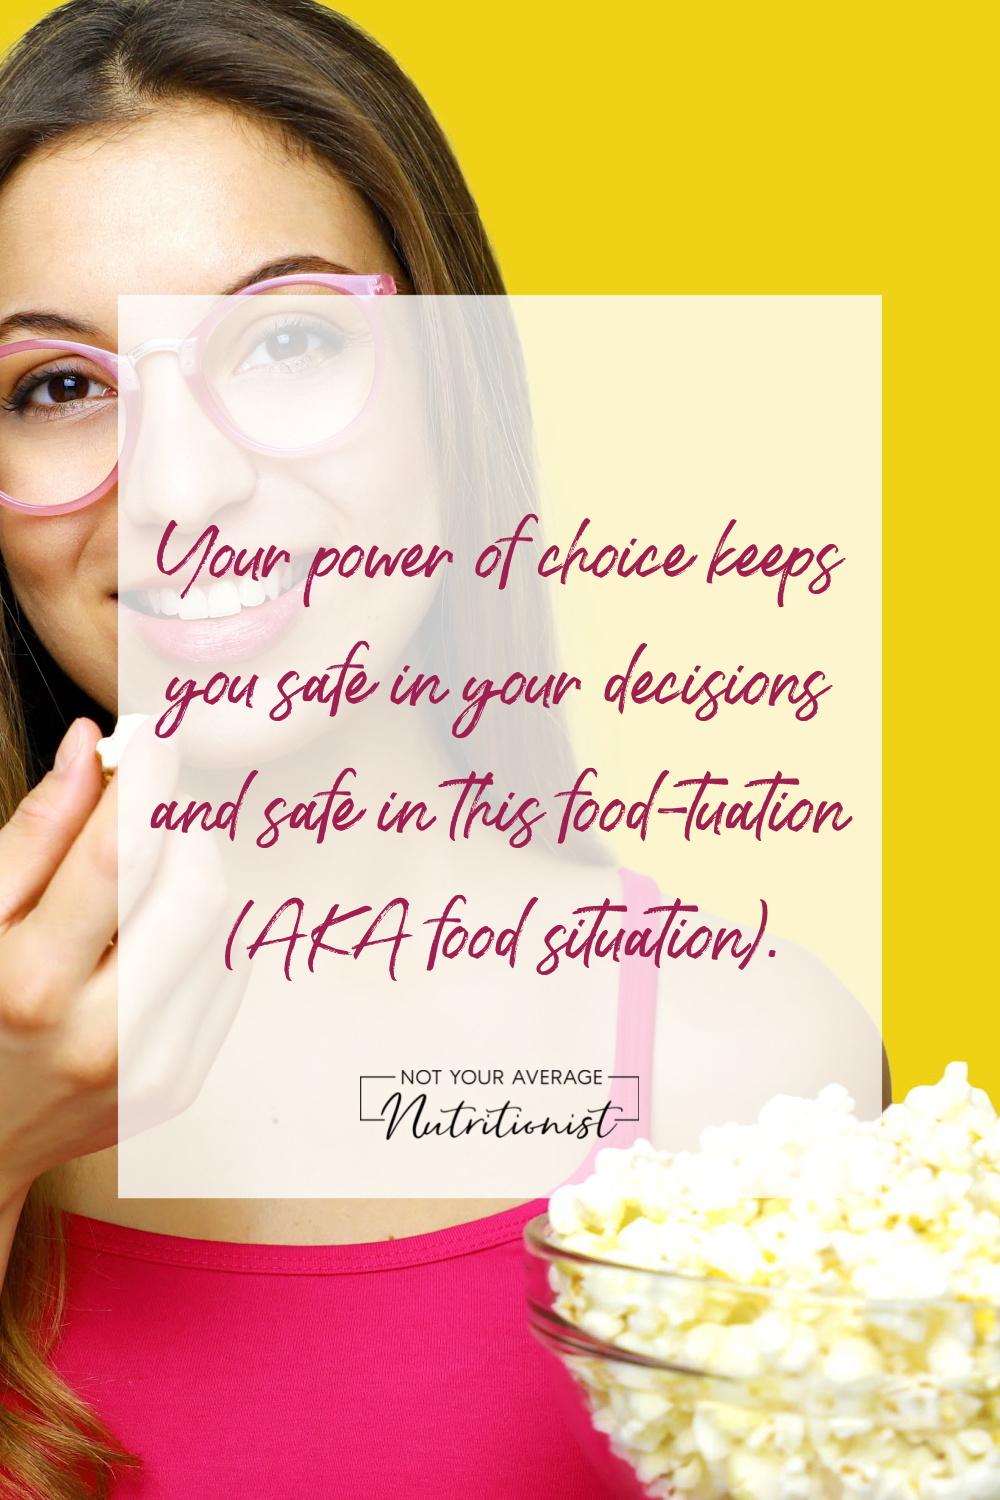 Your power of choice keeps you safe in your decisions and safe in this food-tuation (AKA food situation).